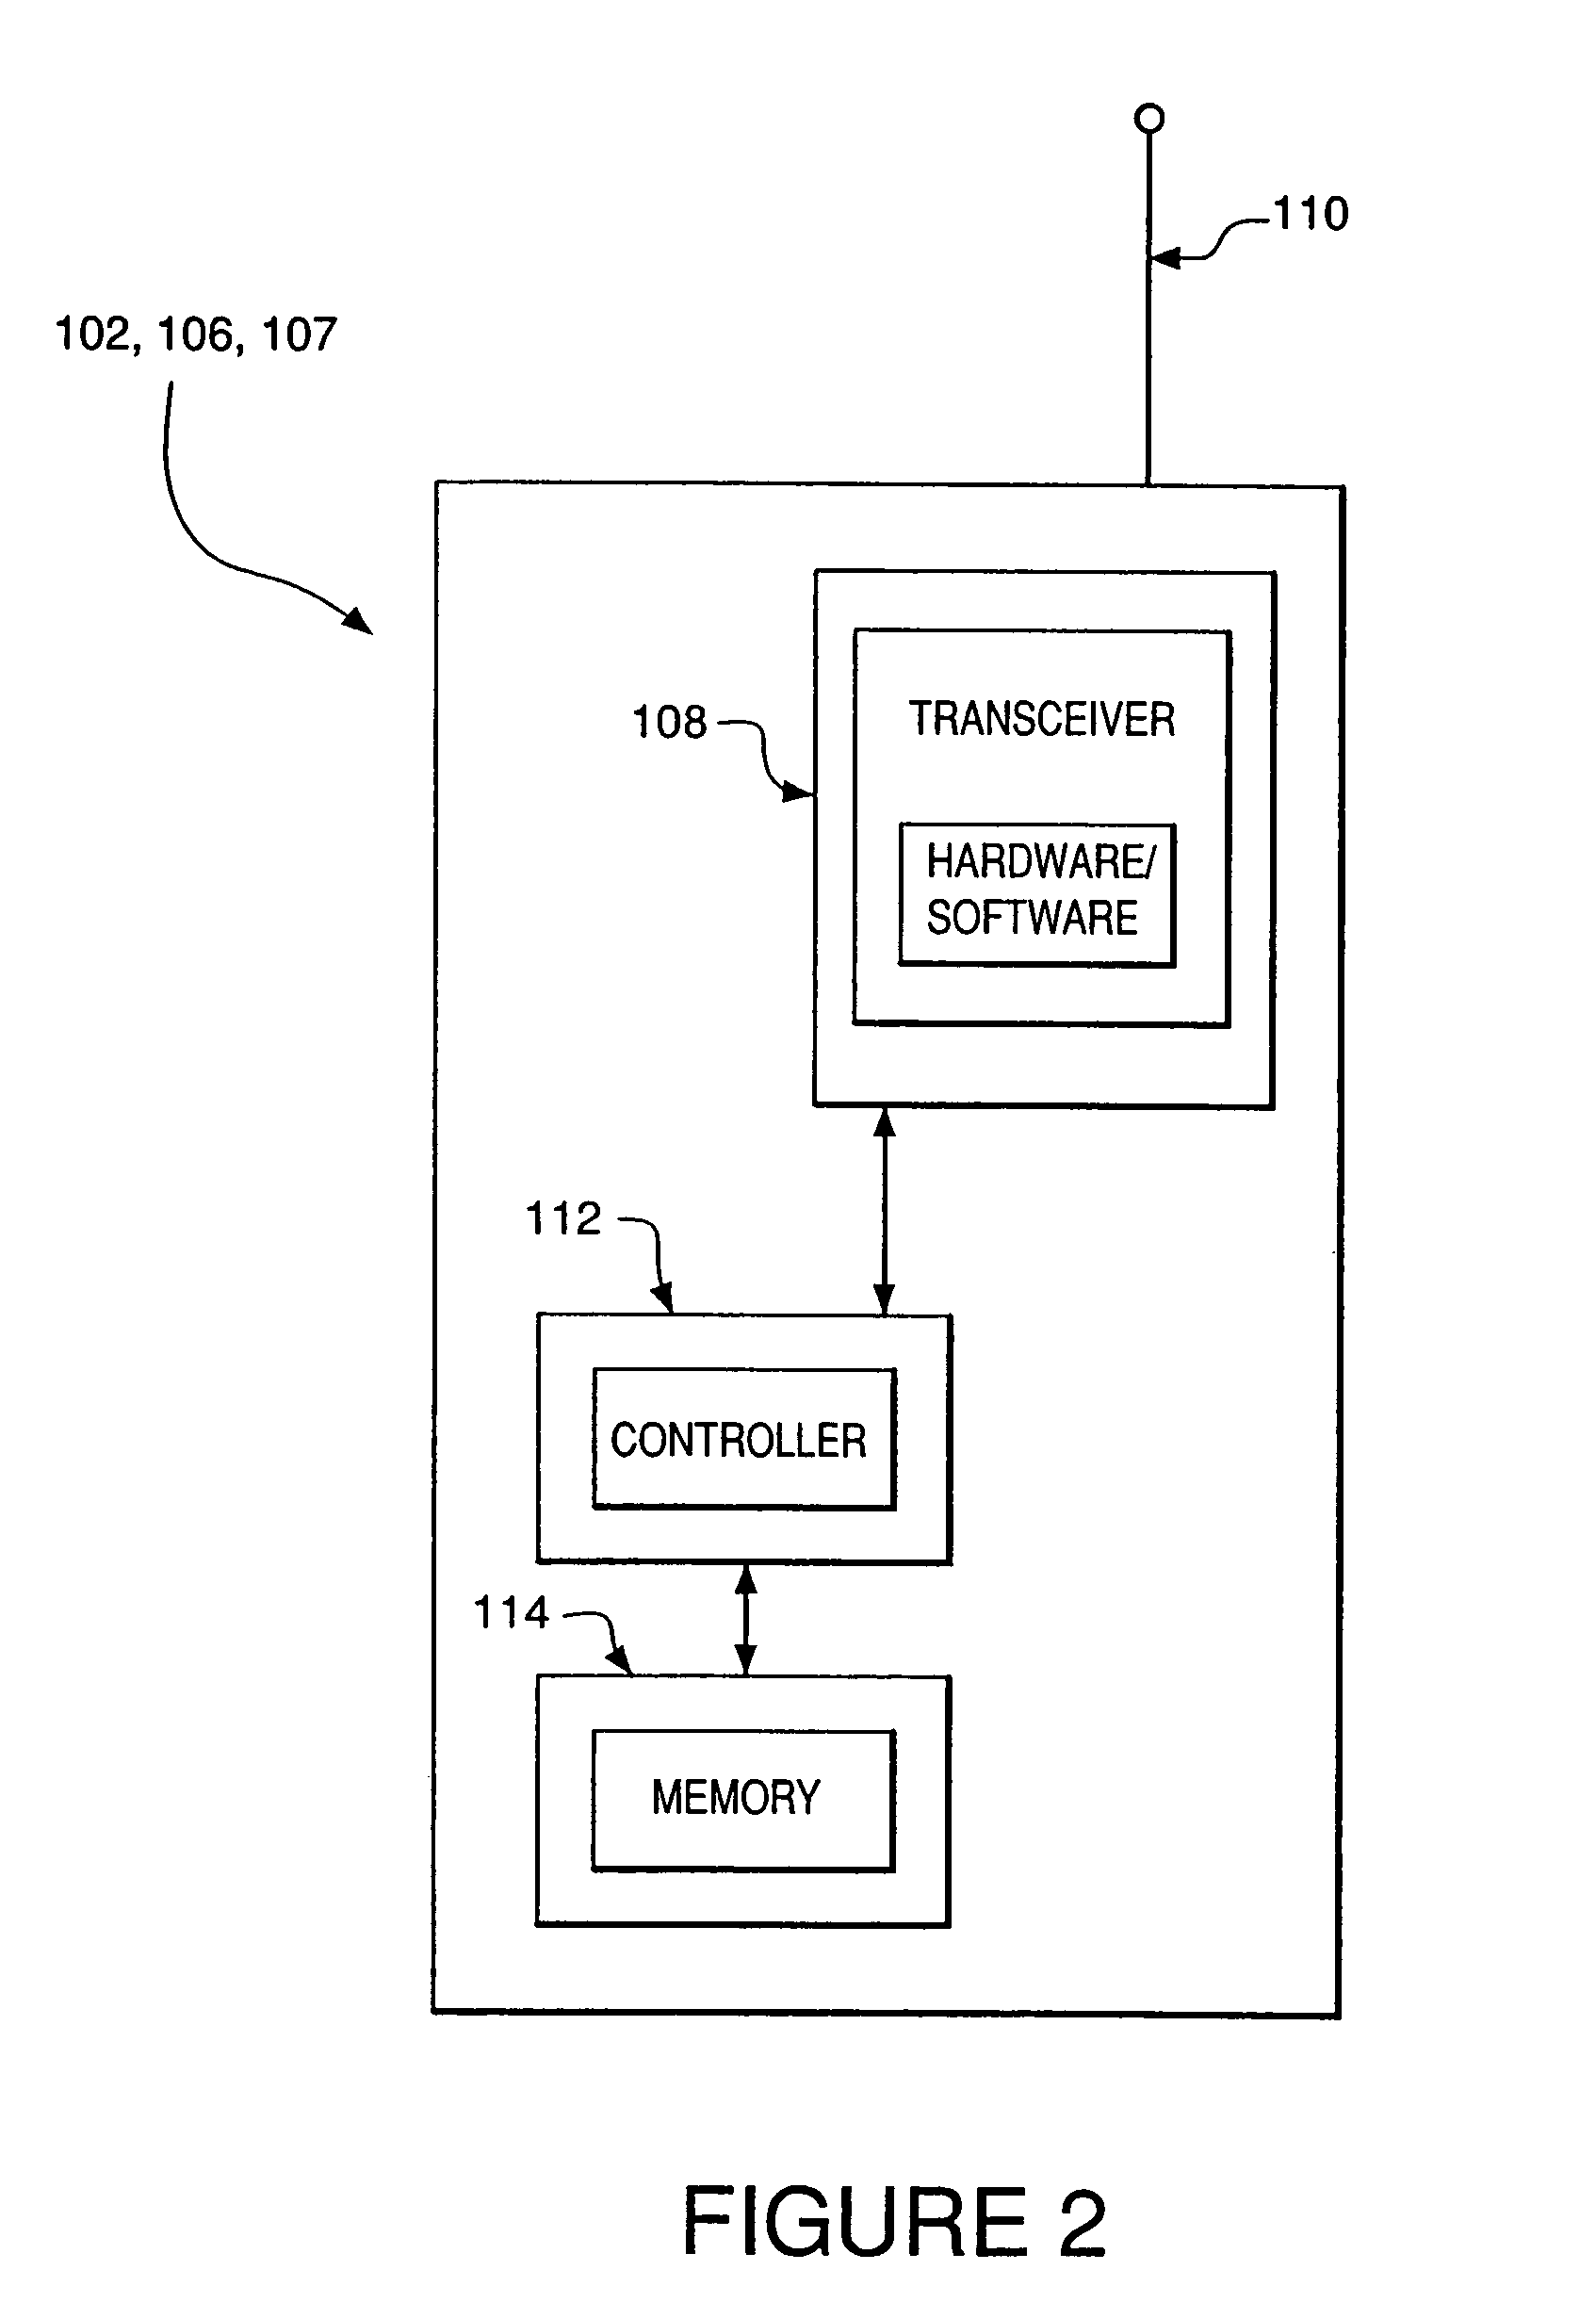 System and method for identifying potential hidden node problems in multi-hop wireless ad-hoc networks for the purpose of avoiding such potentially problem nodes in route selection